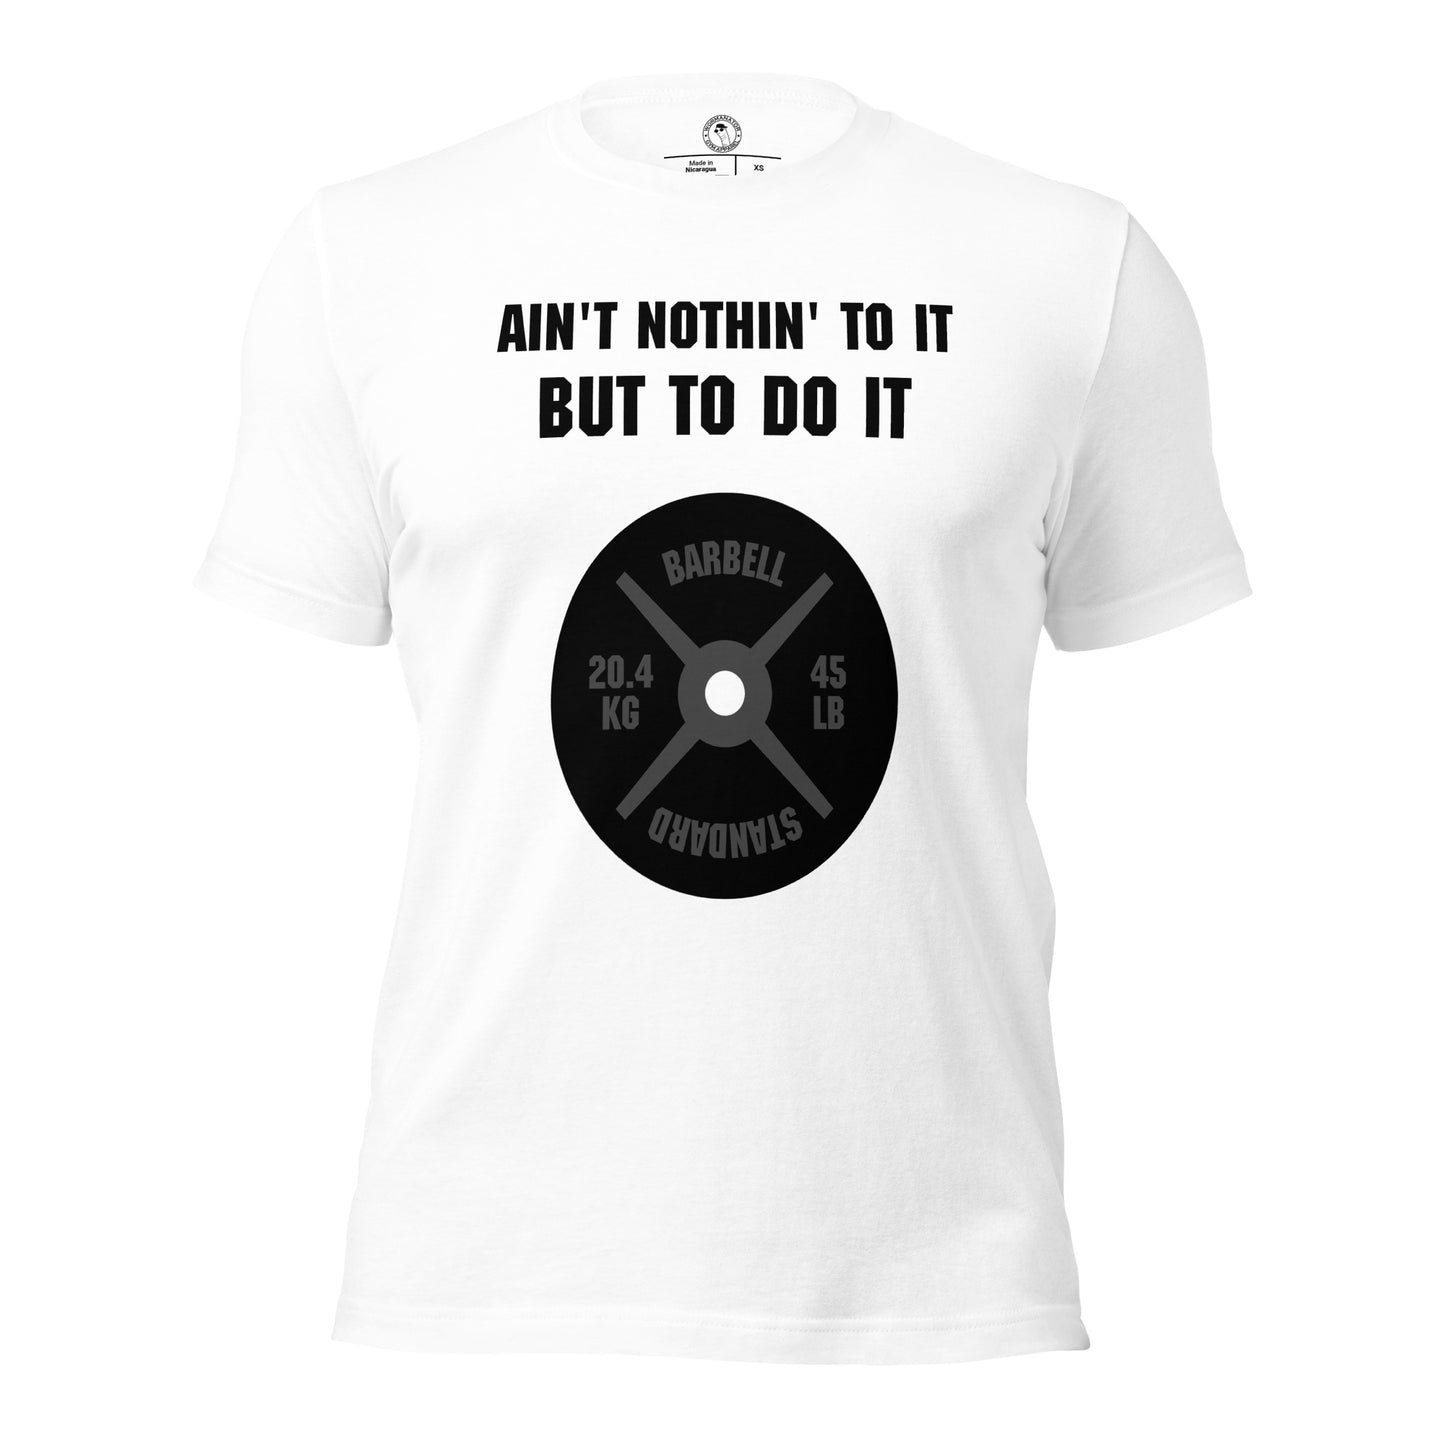 Ain't Nothin' To It But To Do It Shirt in White